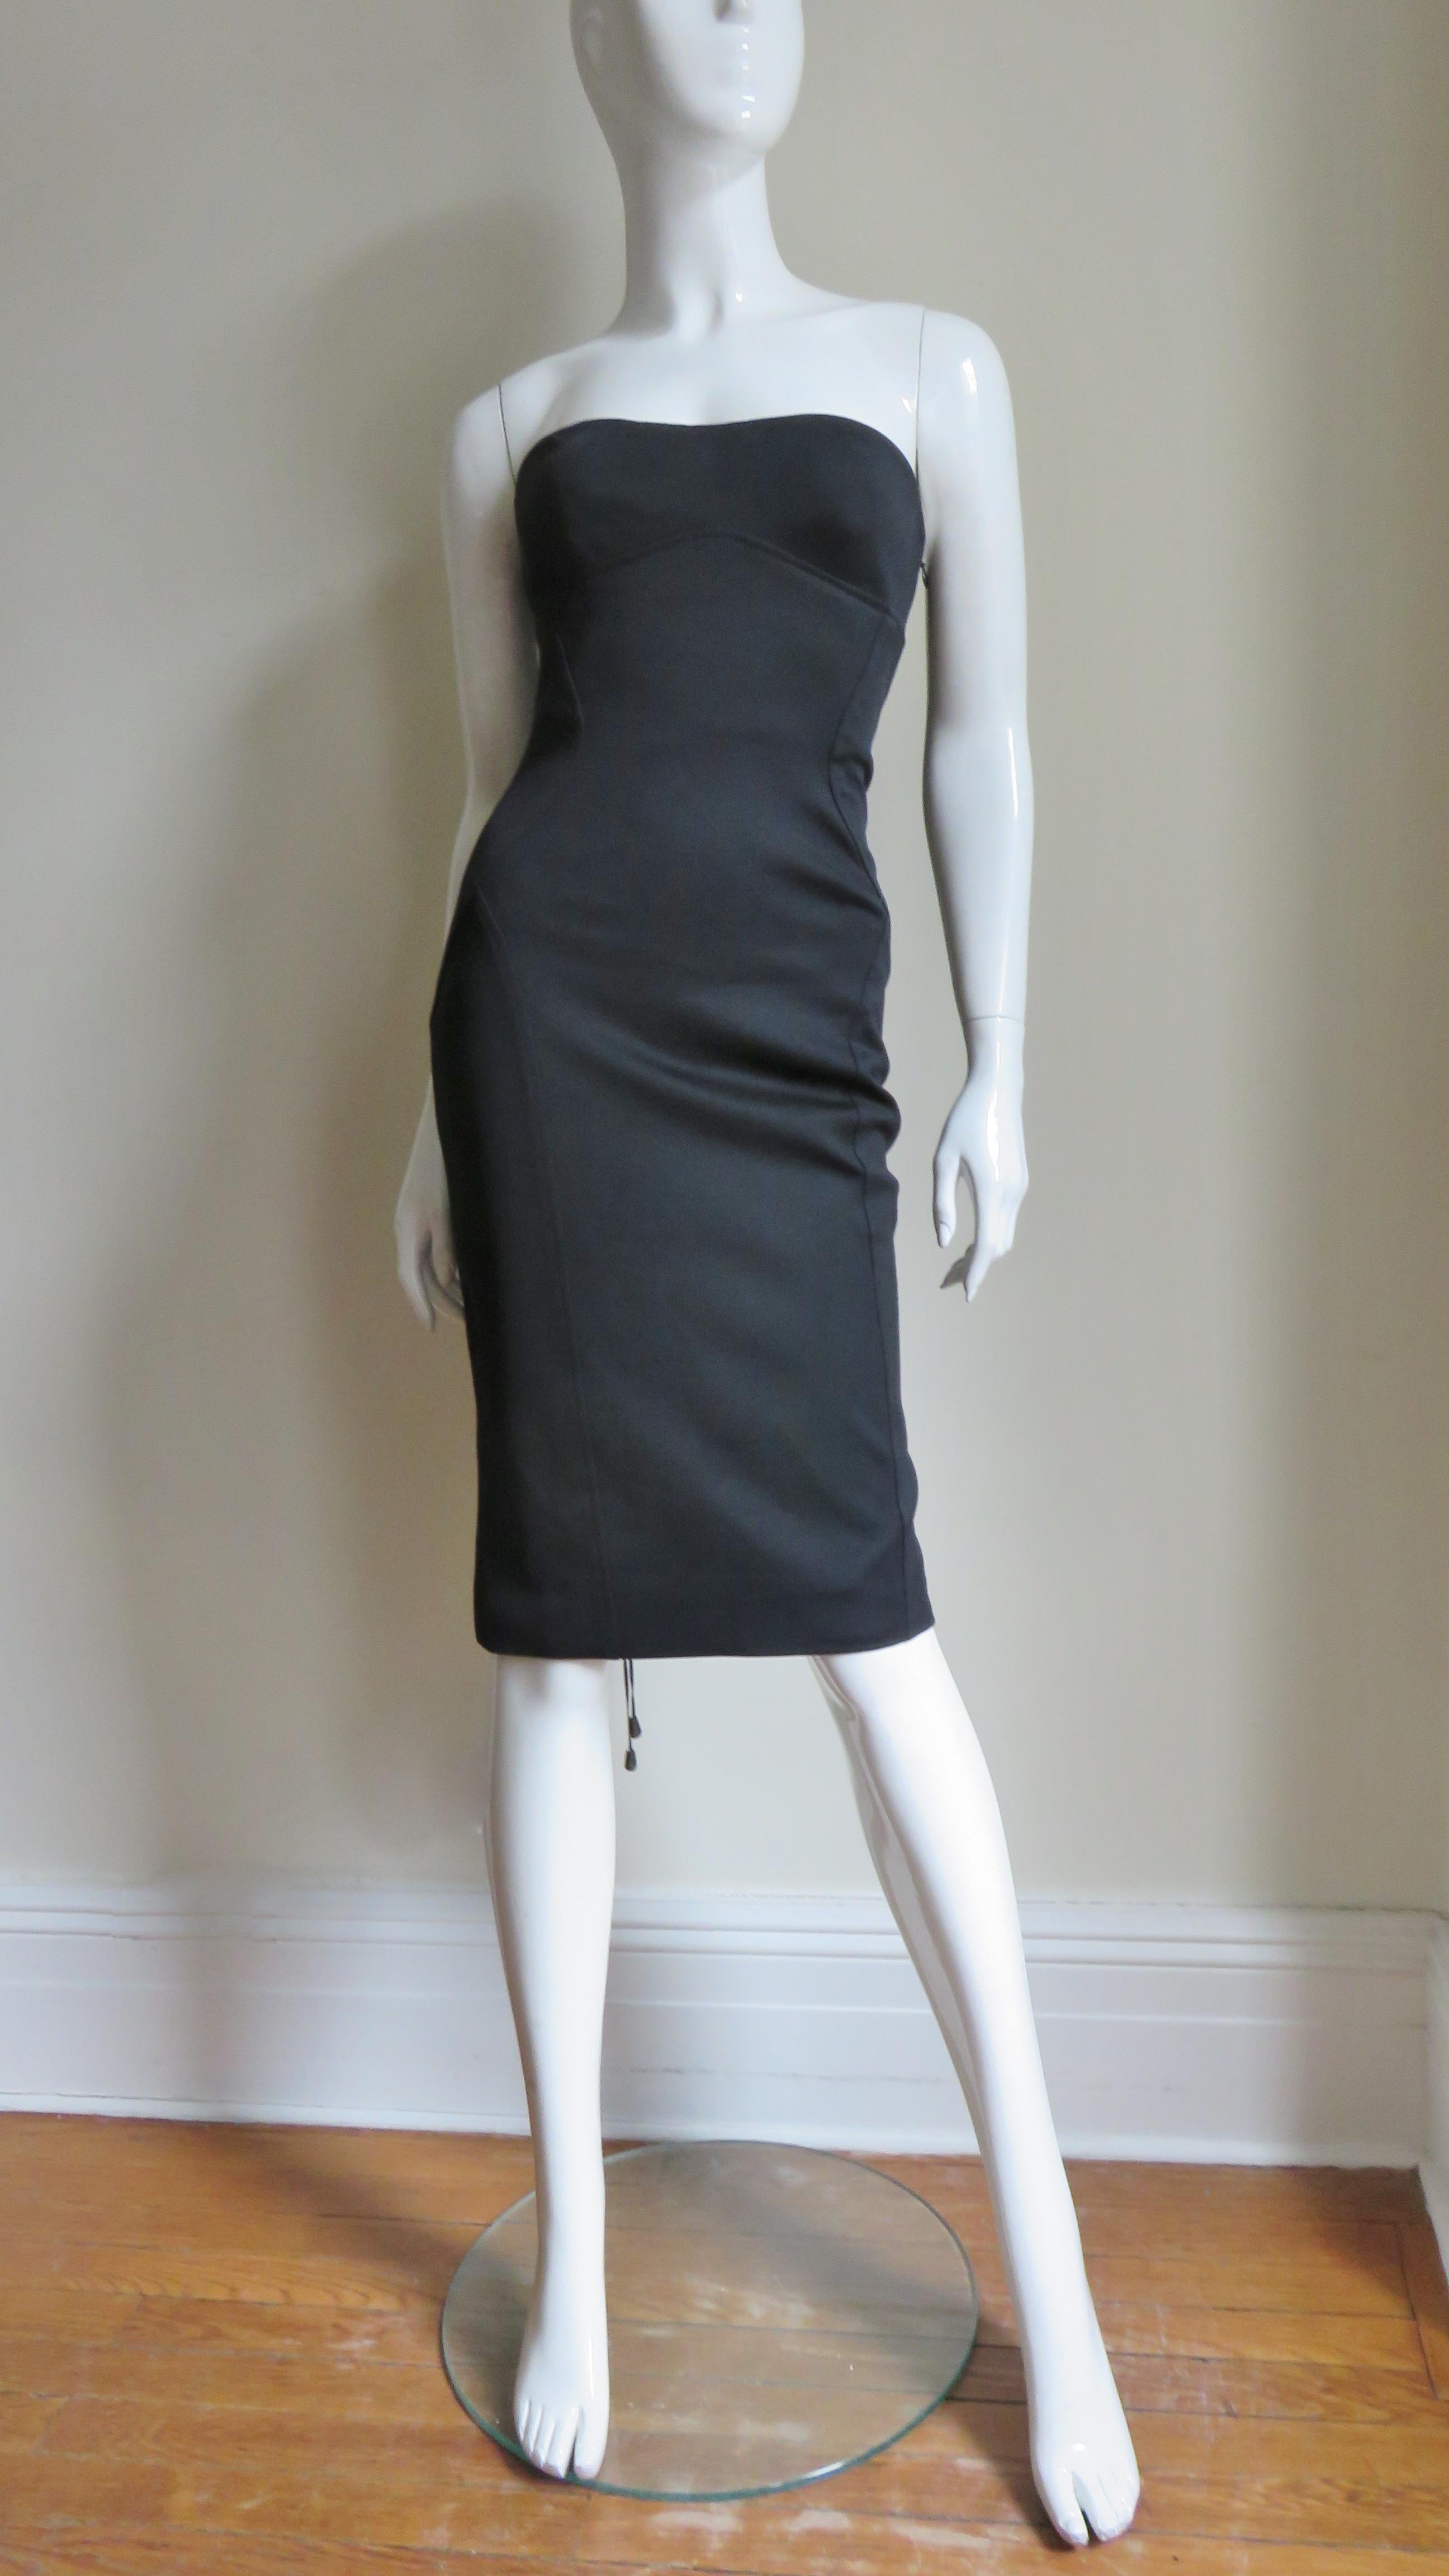 Gianni Versace New Strapless Lace Up Dress For Sale 2